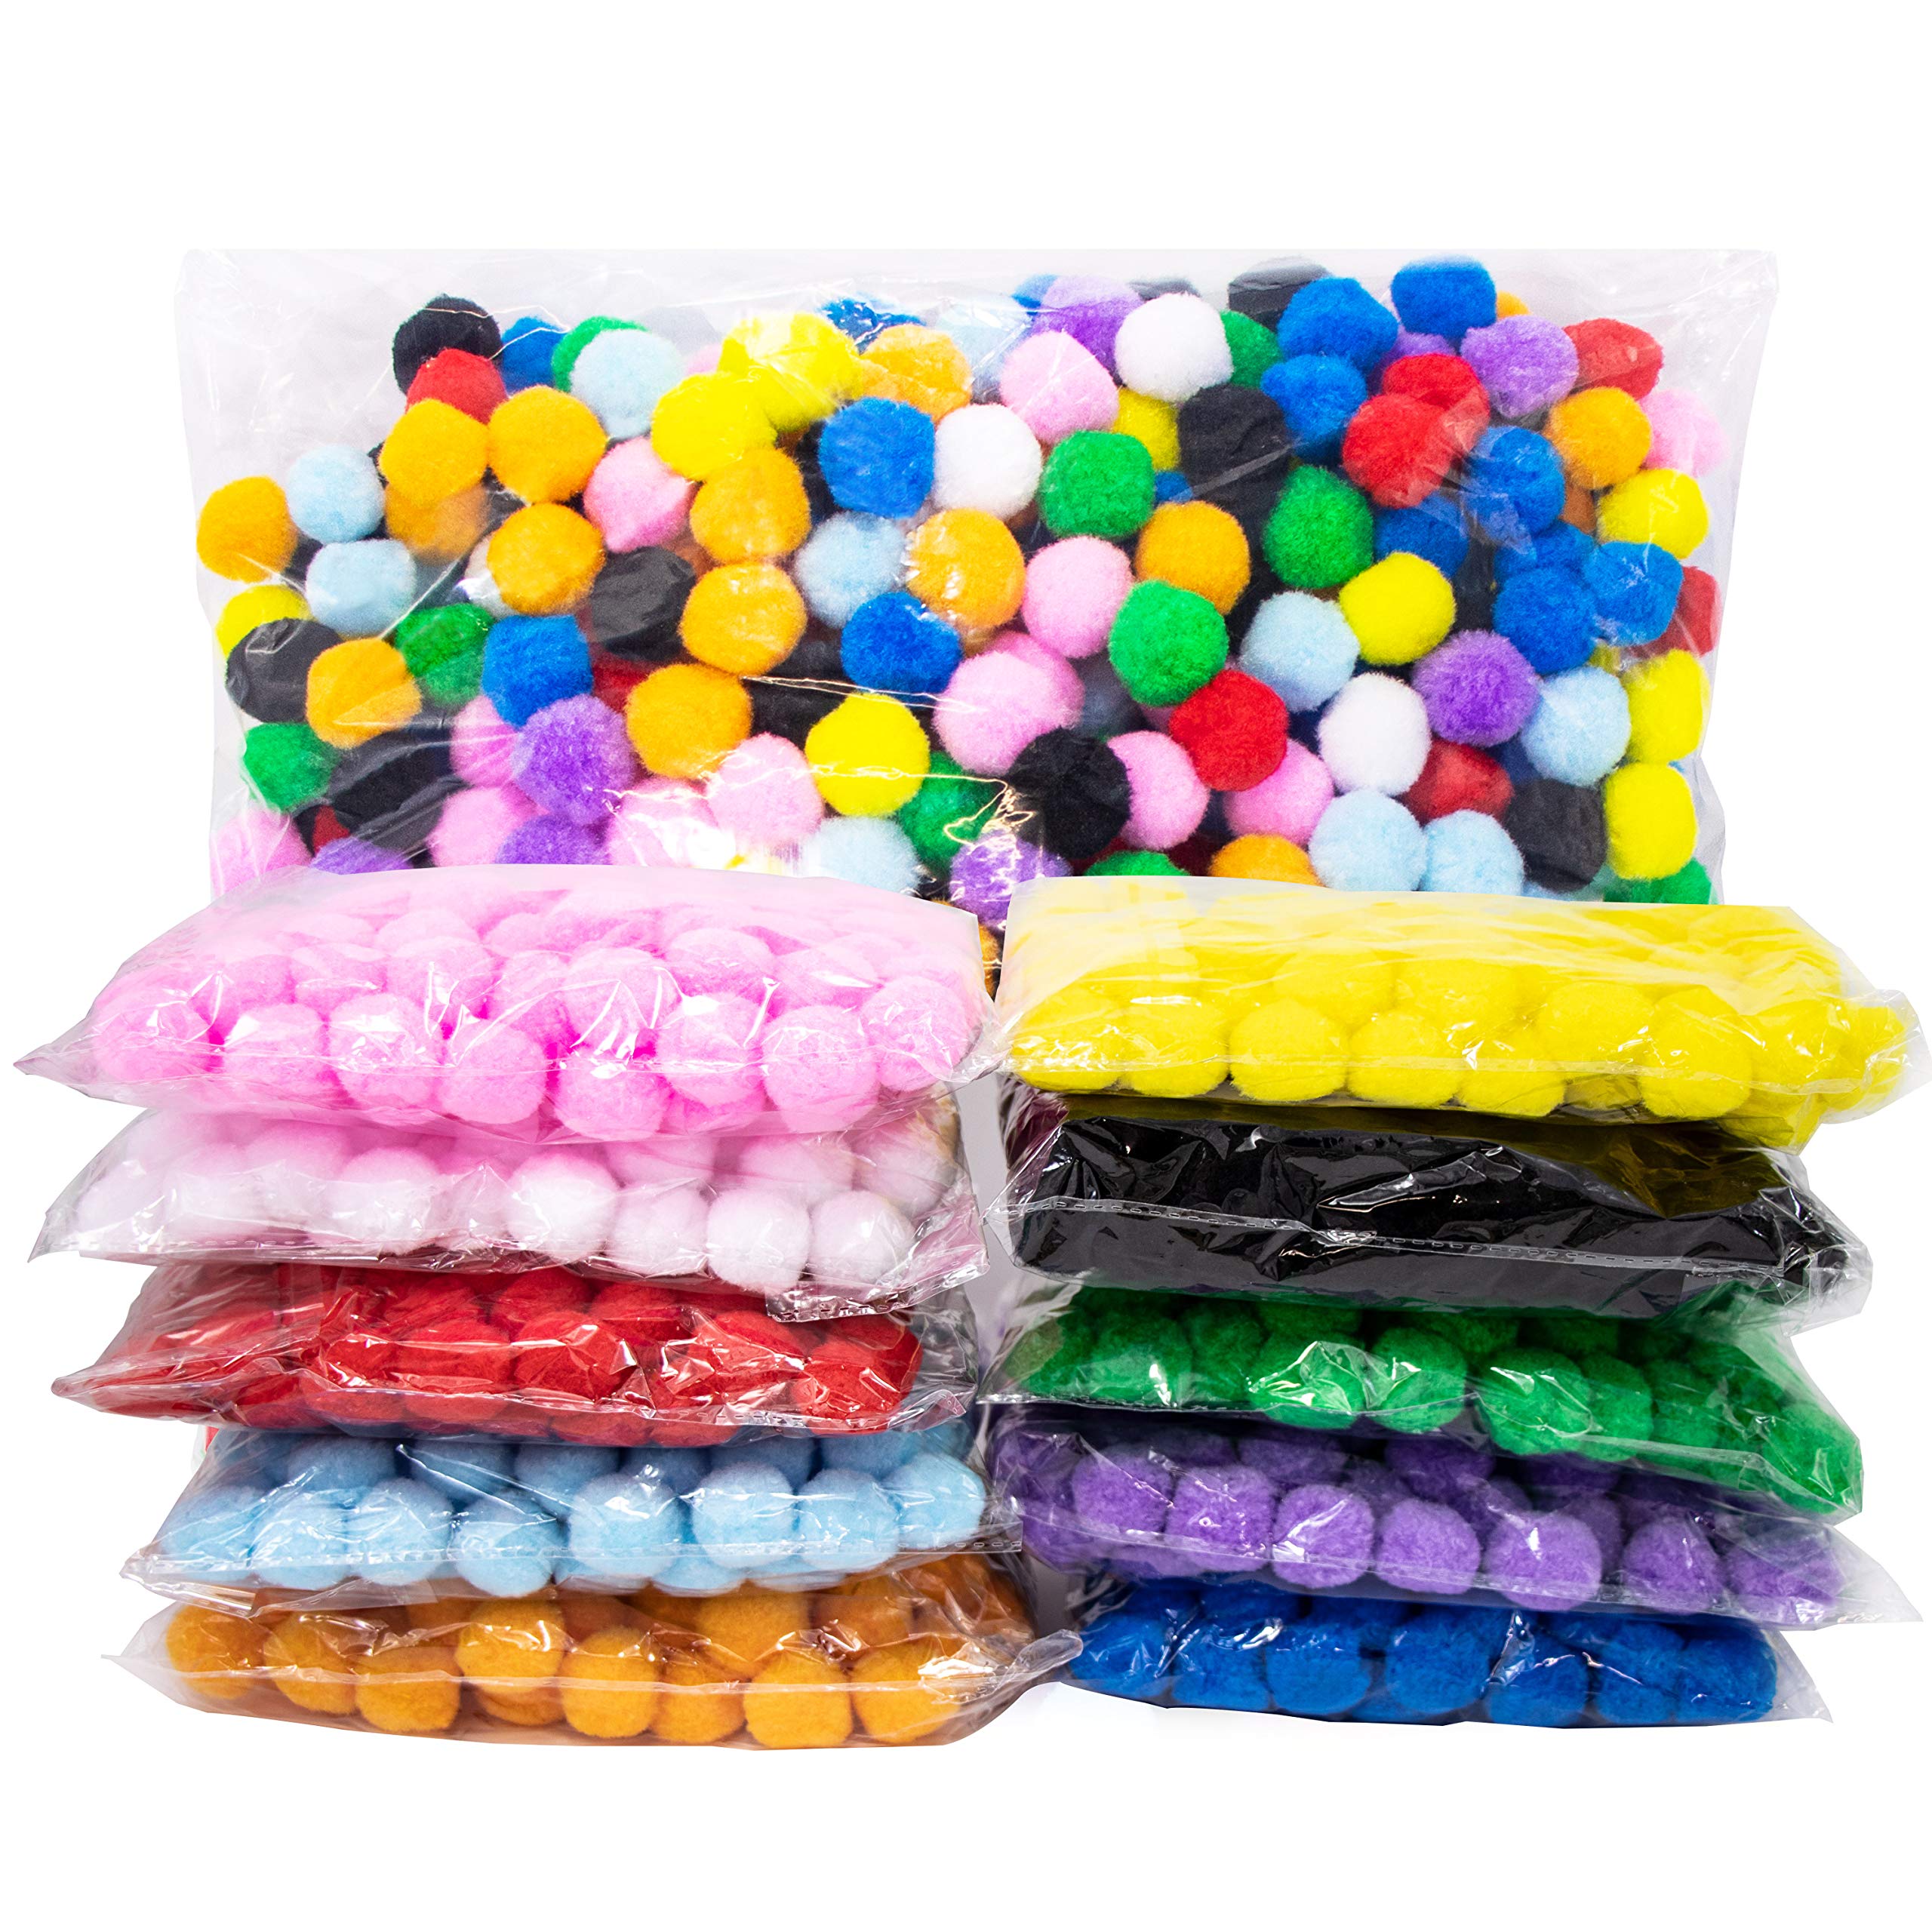 1000 Pieces 1 Inch Pom Poms for Crafts 10 Assorted Colors